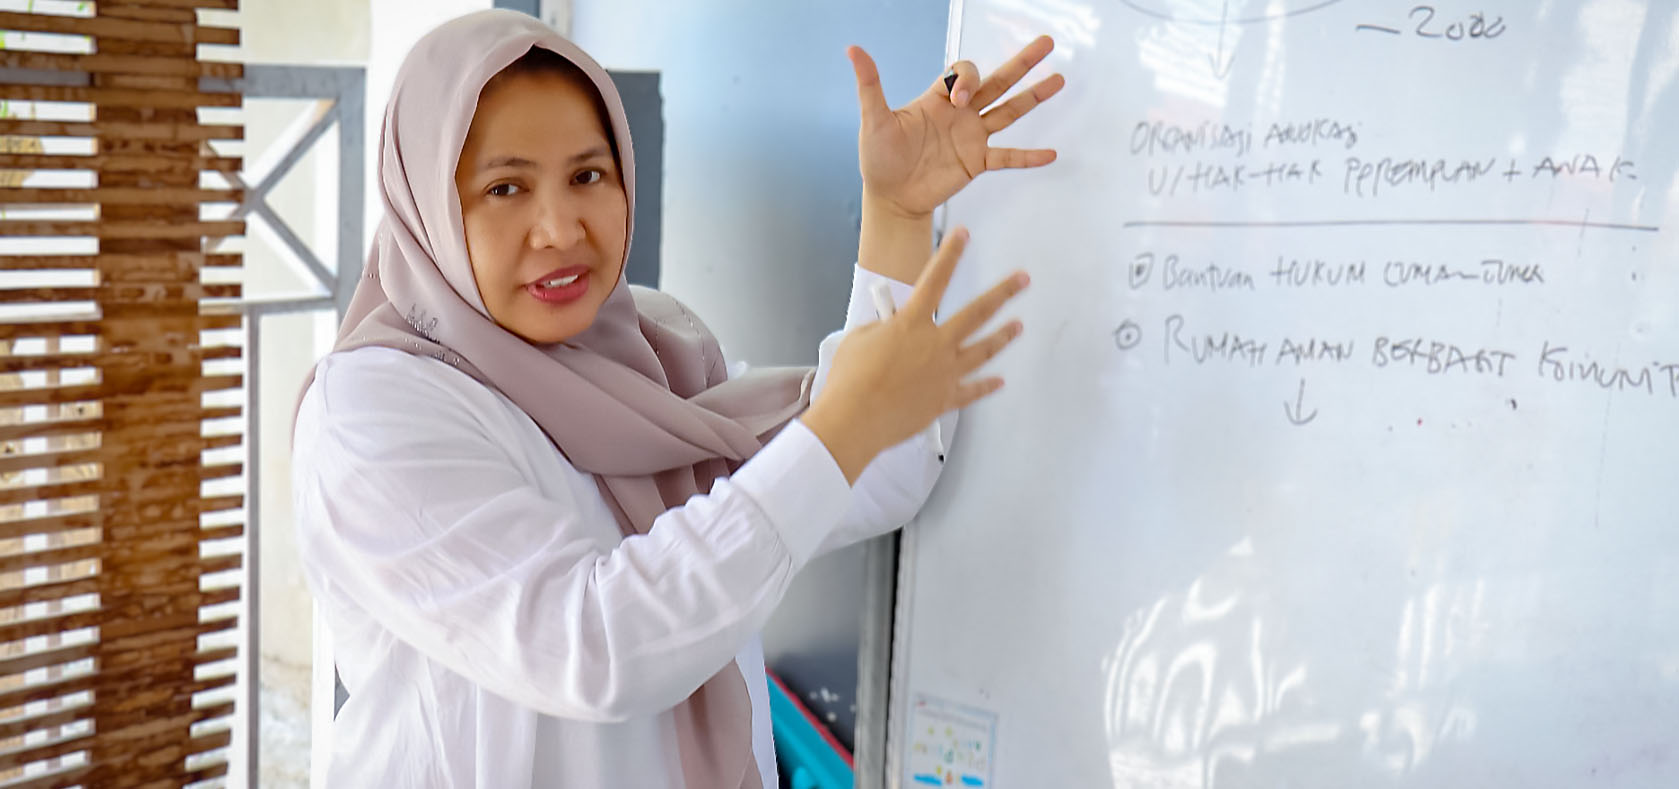 Dewi Rana wearing hijab is explaining something as shown in the whiteboard in from of her.